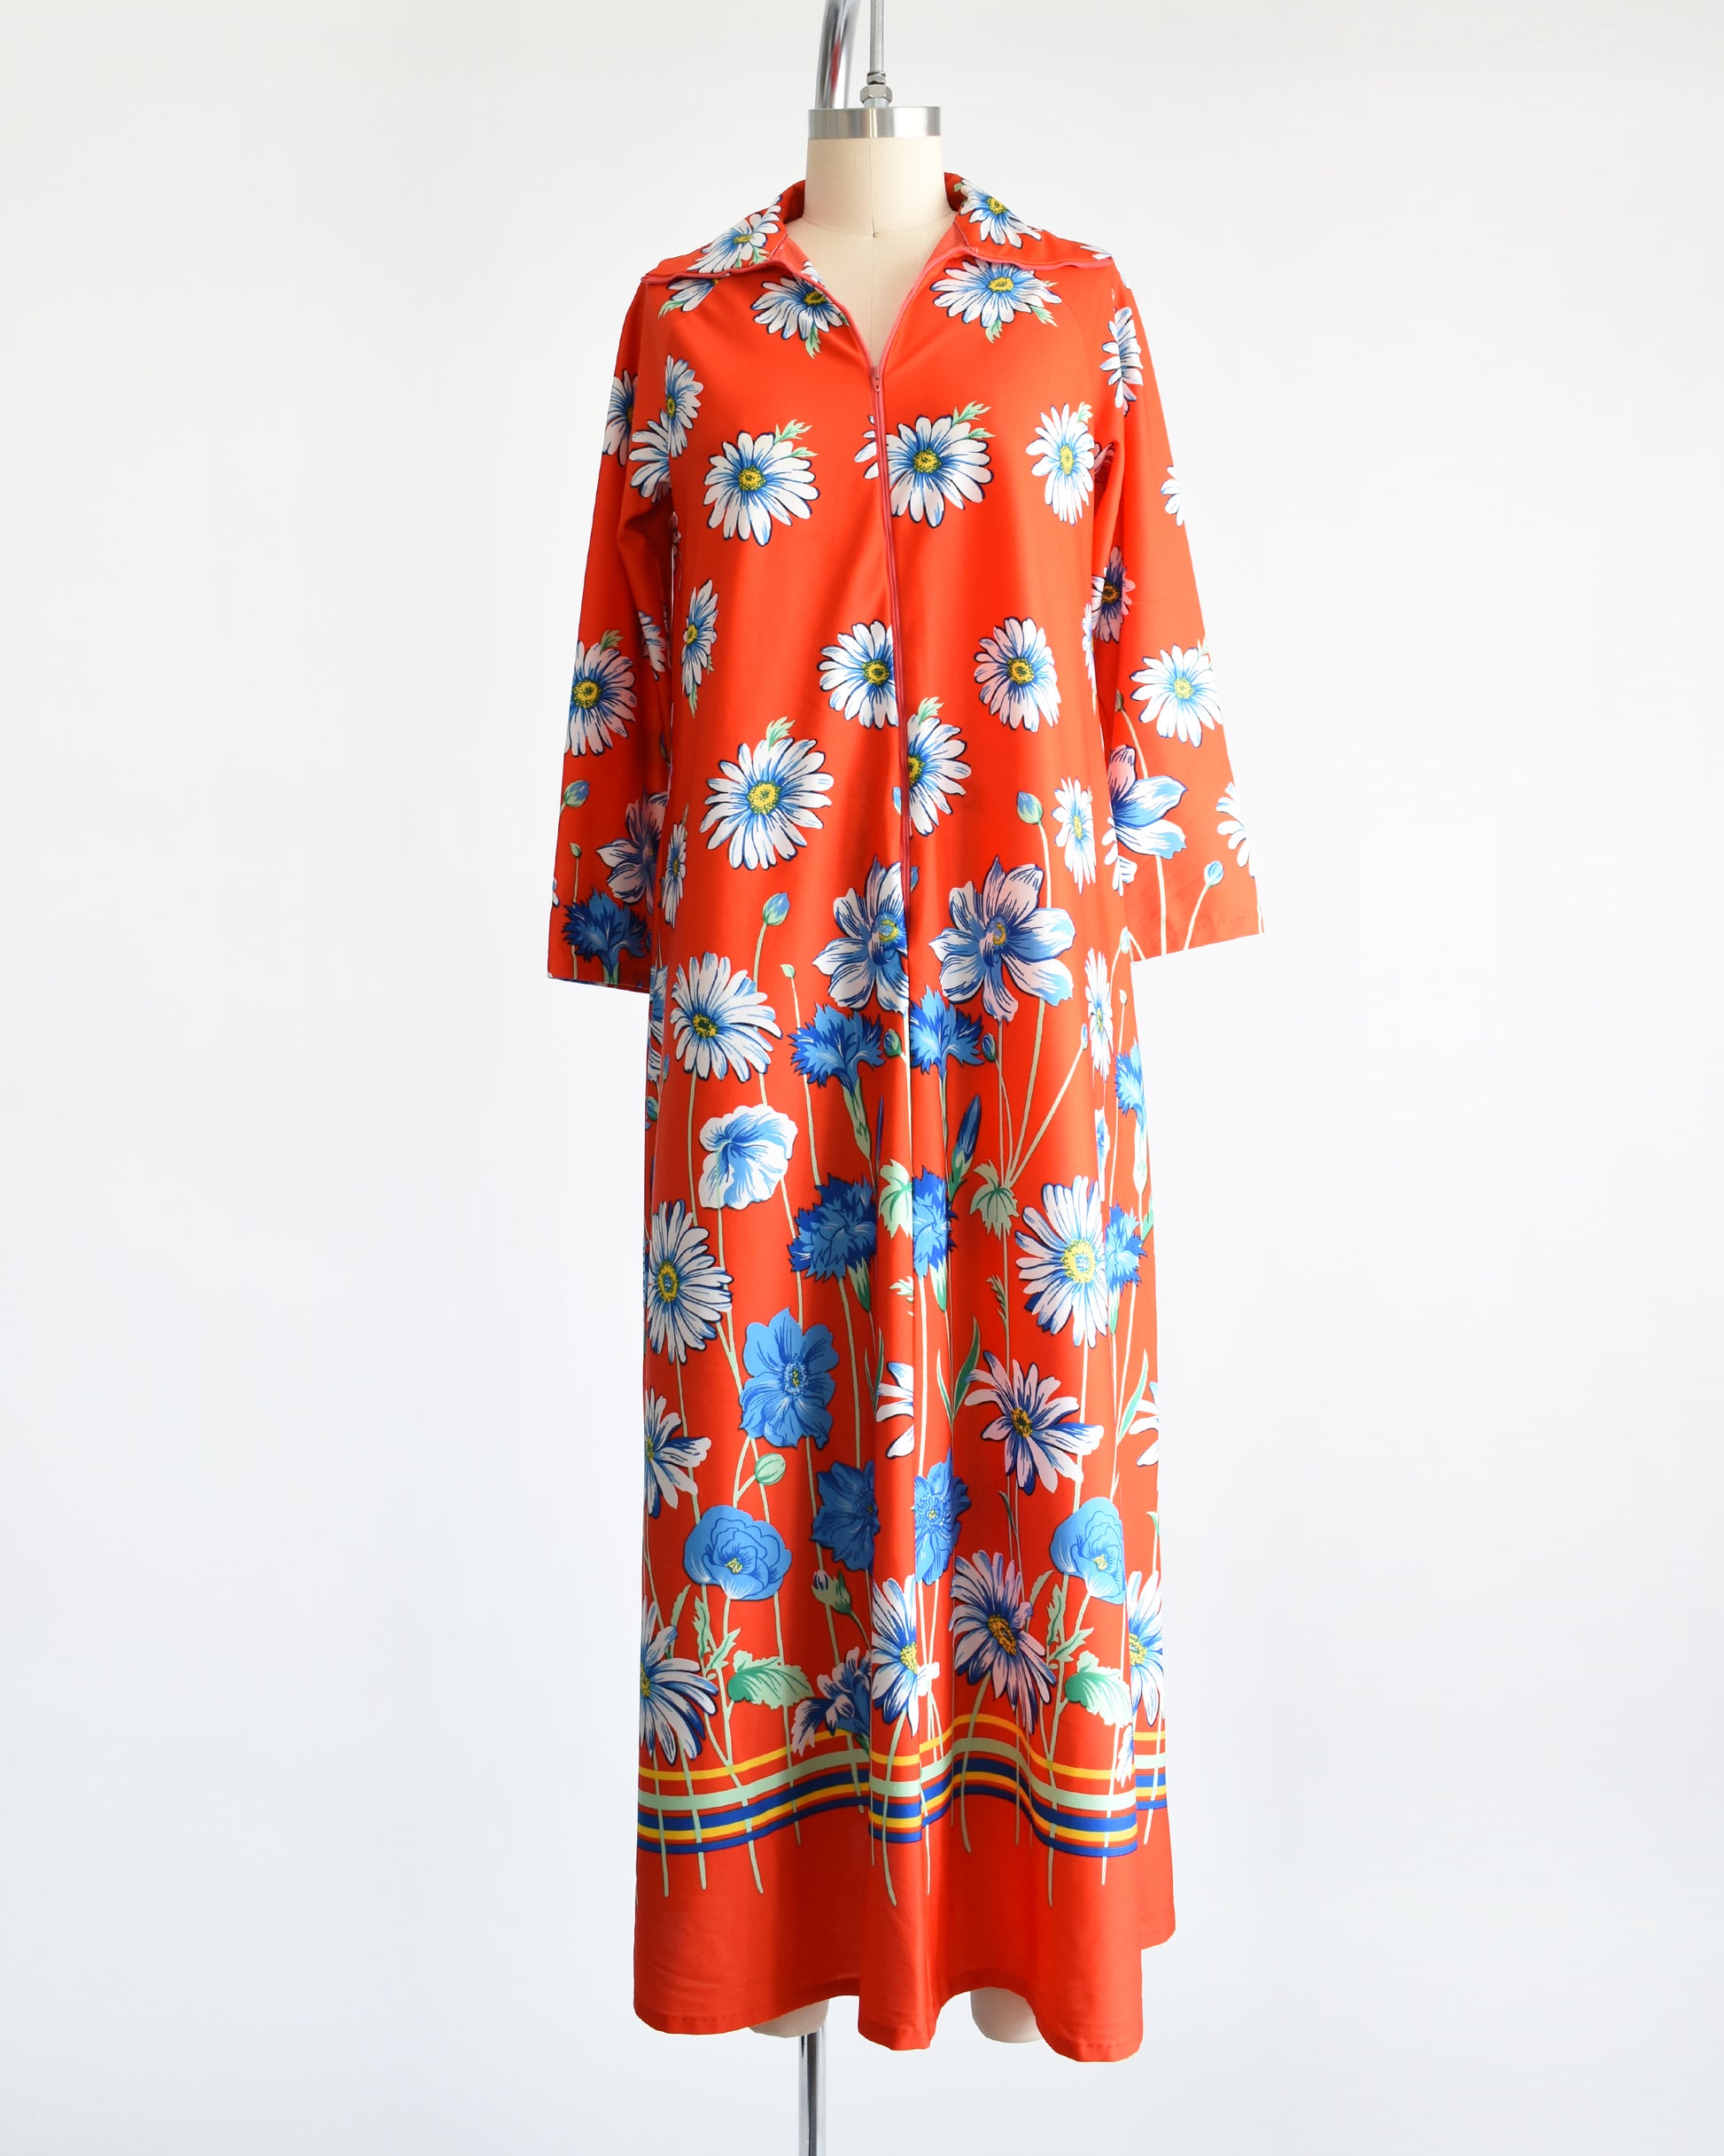 A vintage 1970s red floral lounge dress with a zipper down the front.  The zipper is zipped down a little bit in this photo